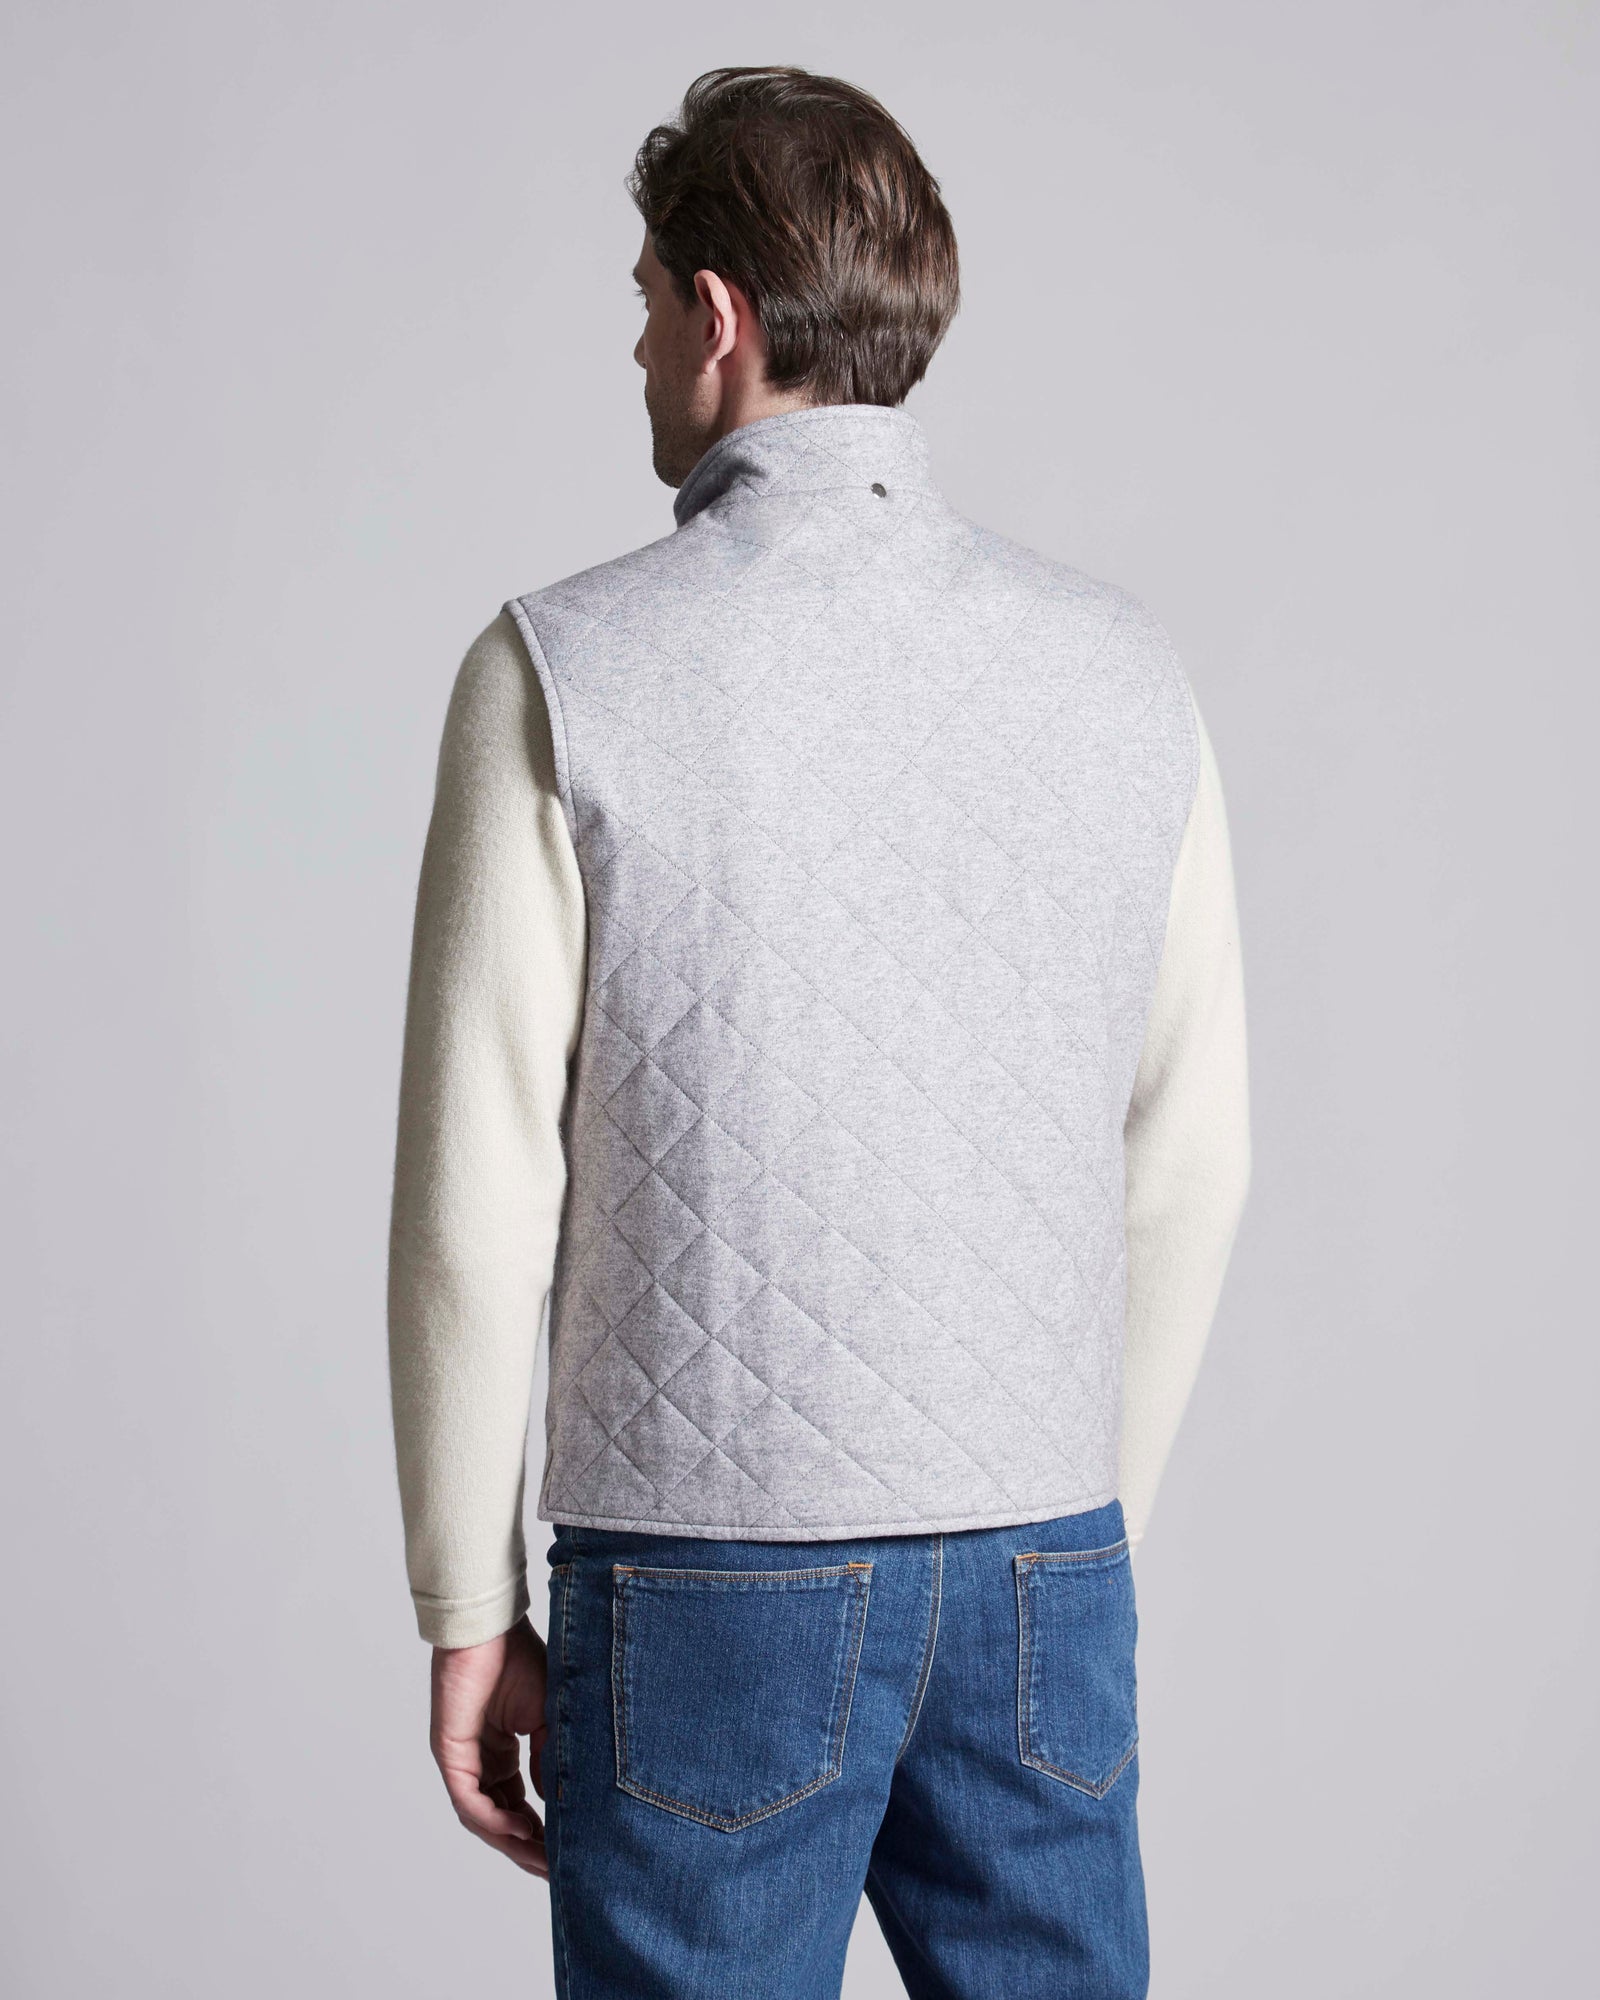 Grey/Ice White men's reversible quilted cashmere vest